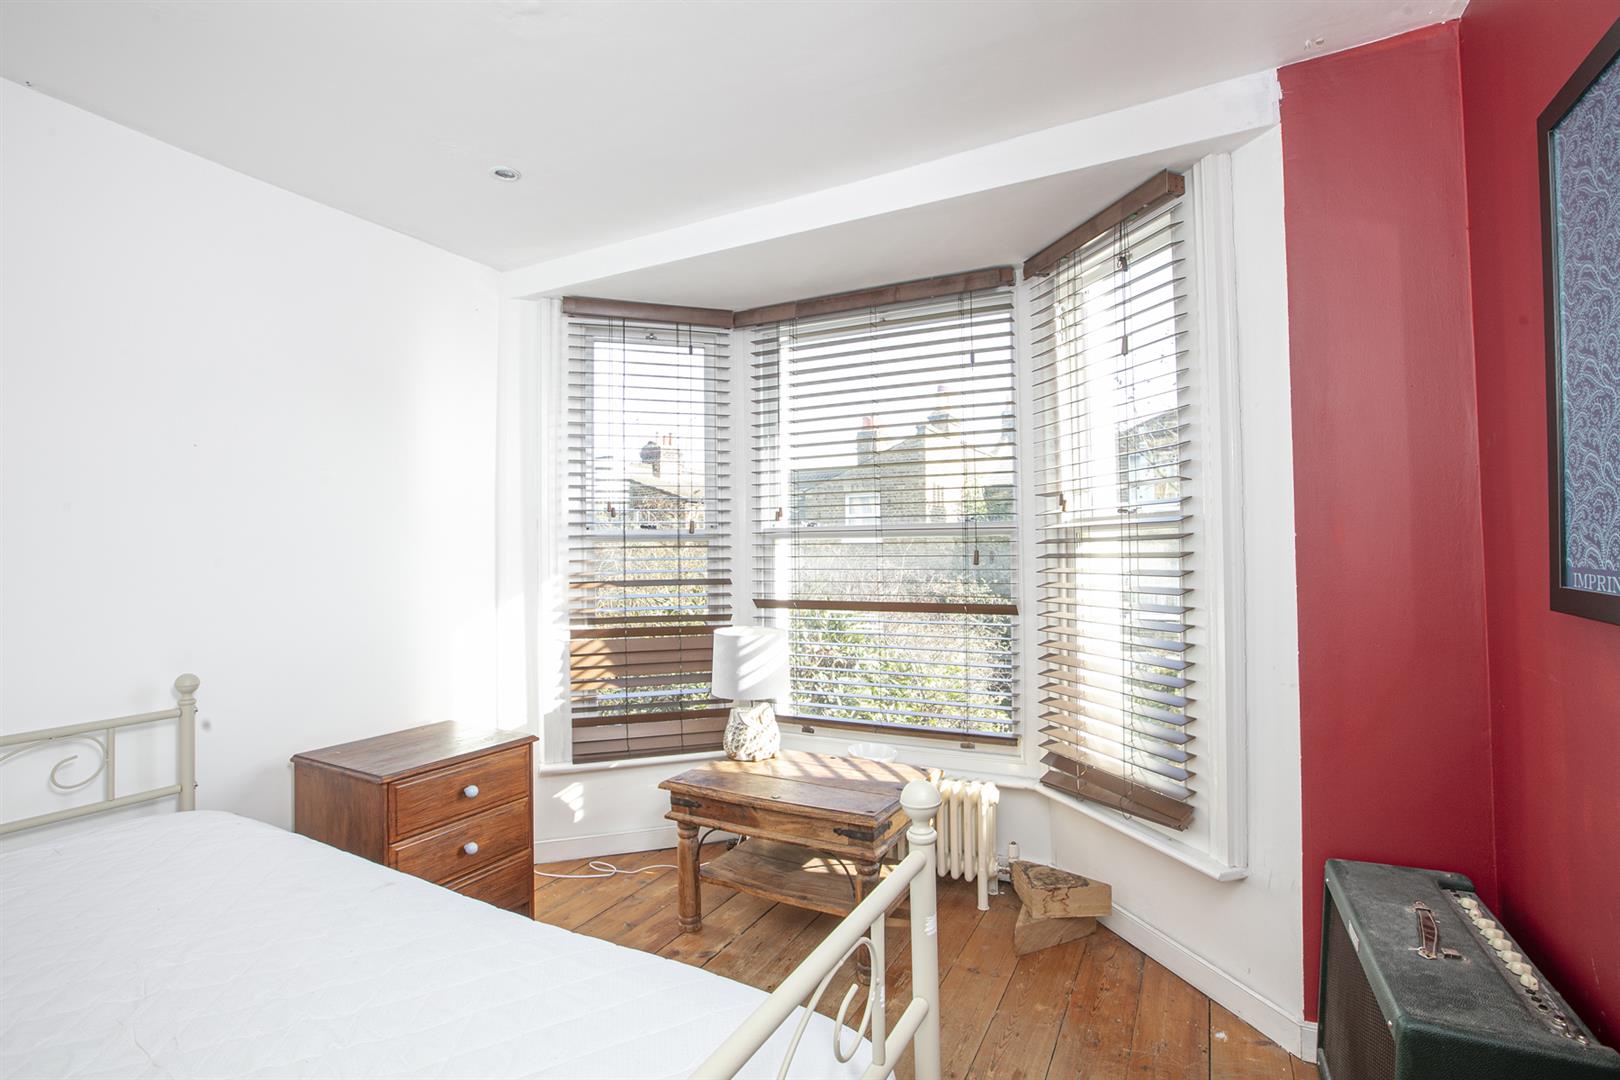 Flat - Conversion For Sale in Shenley Road, London, SE5 782 view8